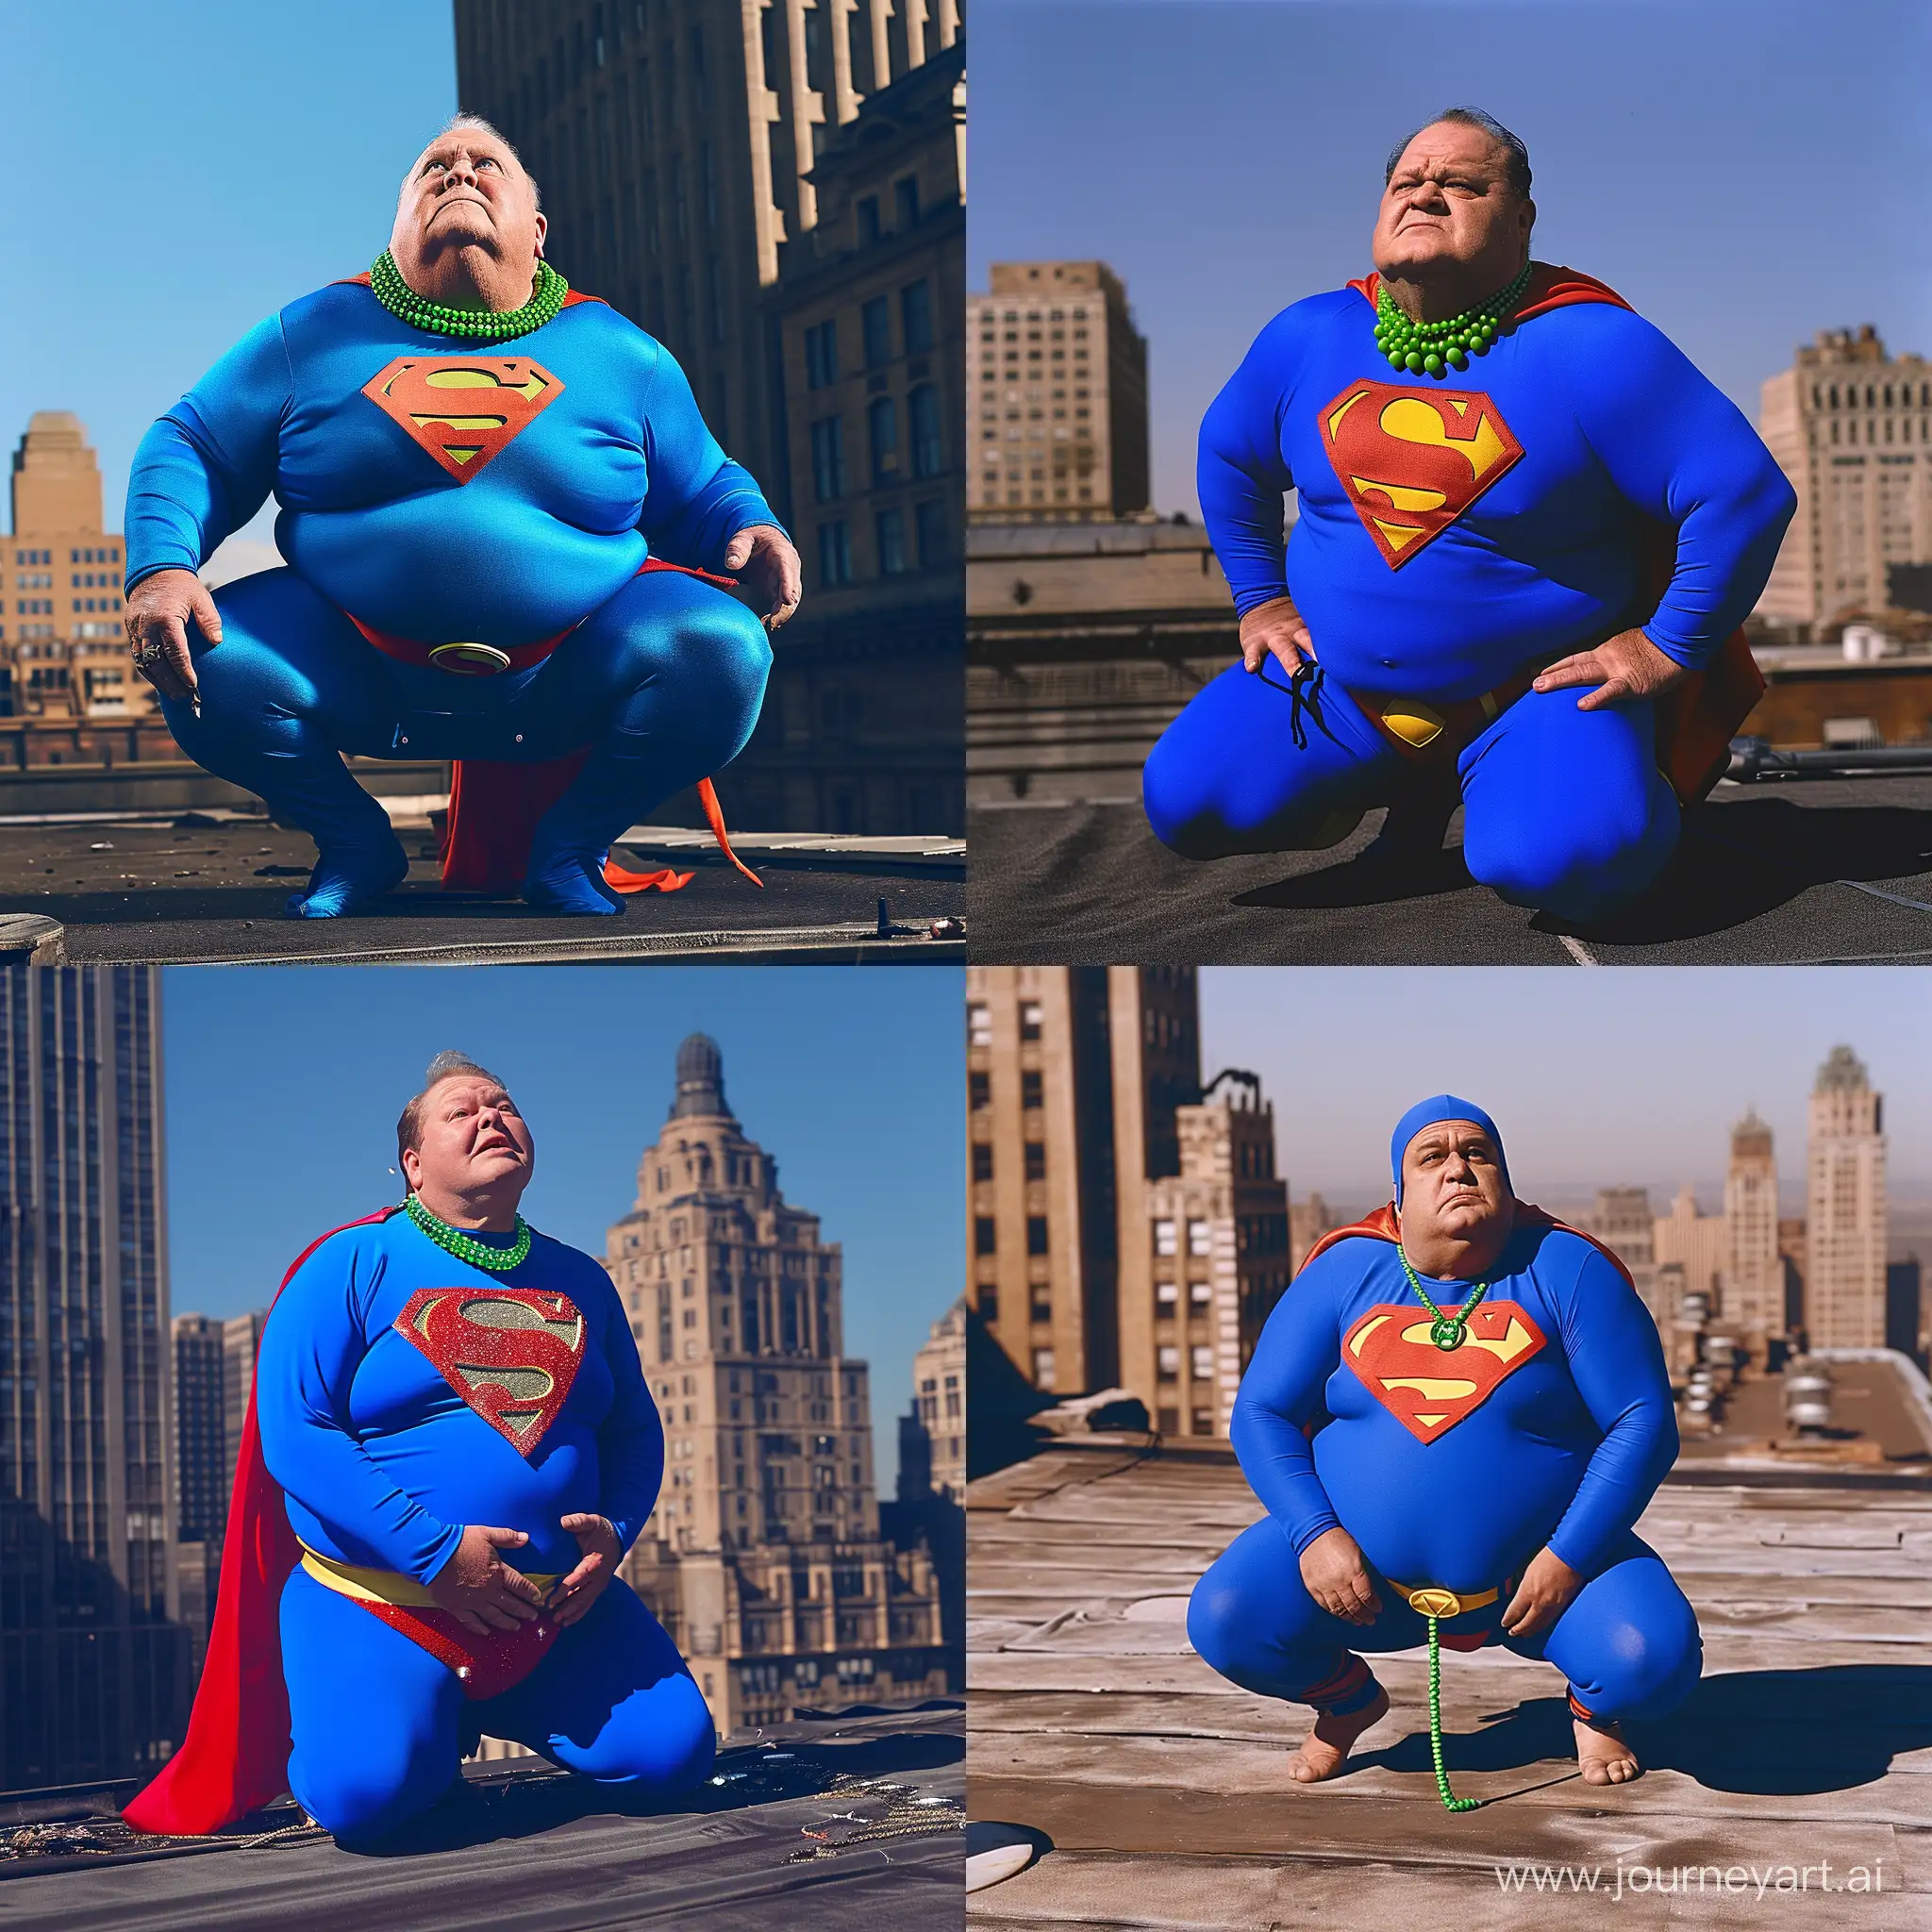 Elderly-Superman-Enthusiast-Embraces-Heroic-Legacy-on-Rooftop